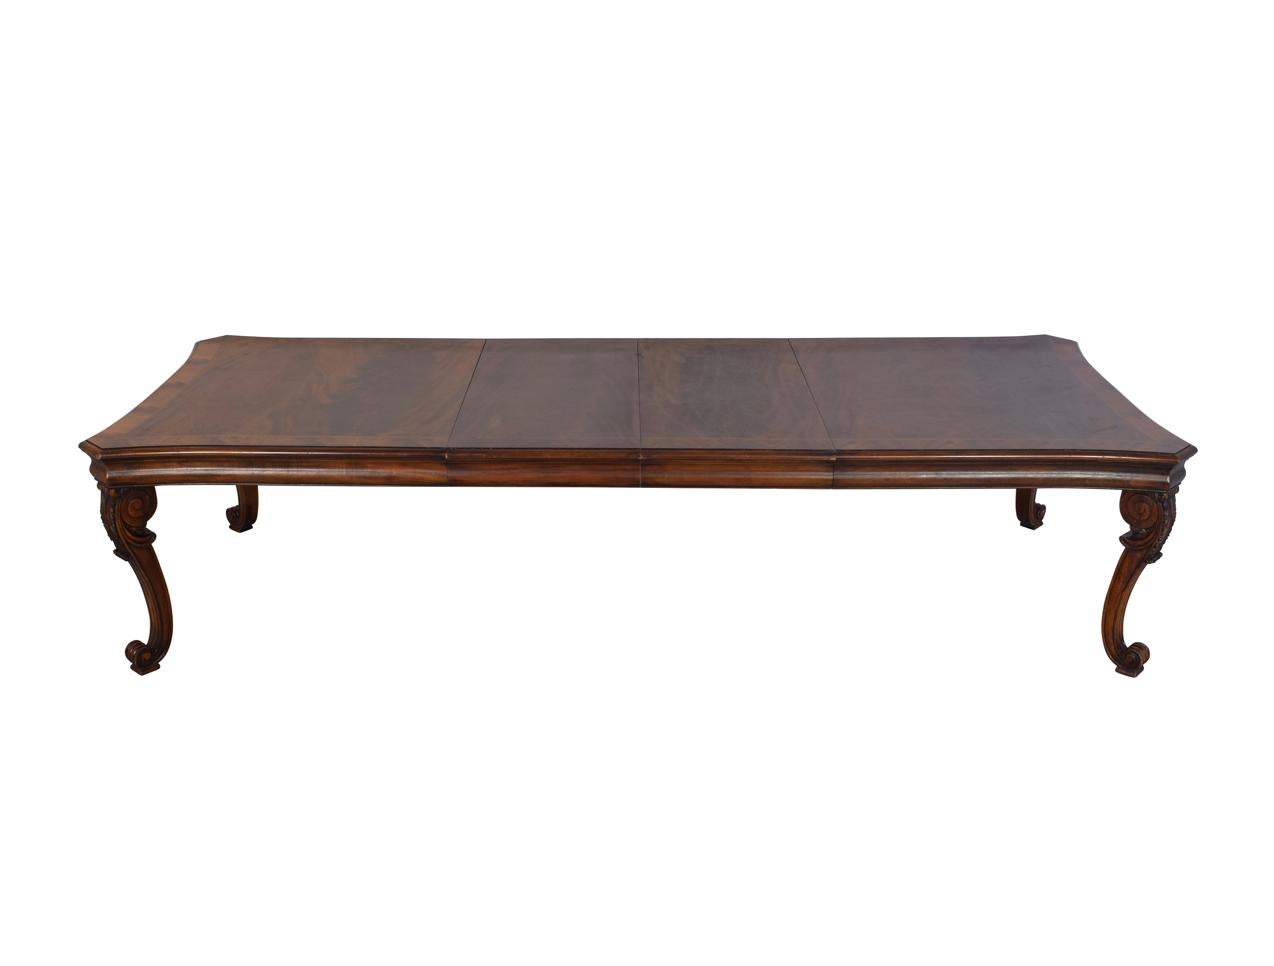 Neoclassical Revival Ralph Lauren Mahogany Dining Table with Leaves, Silverware Drawers, Labelled